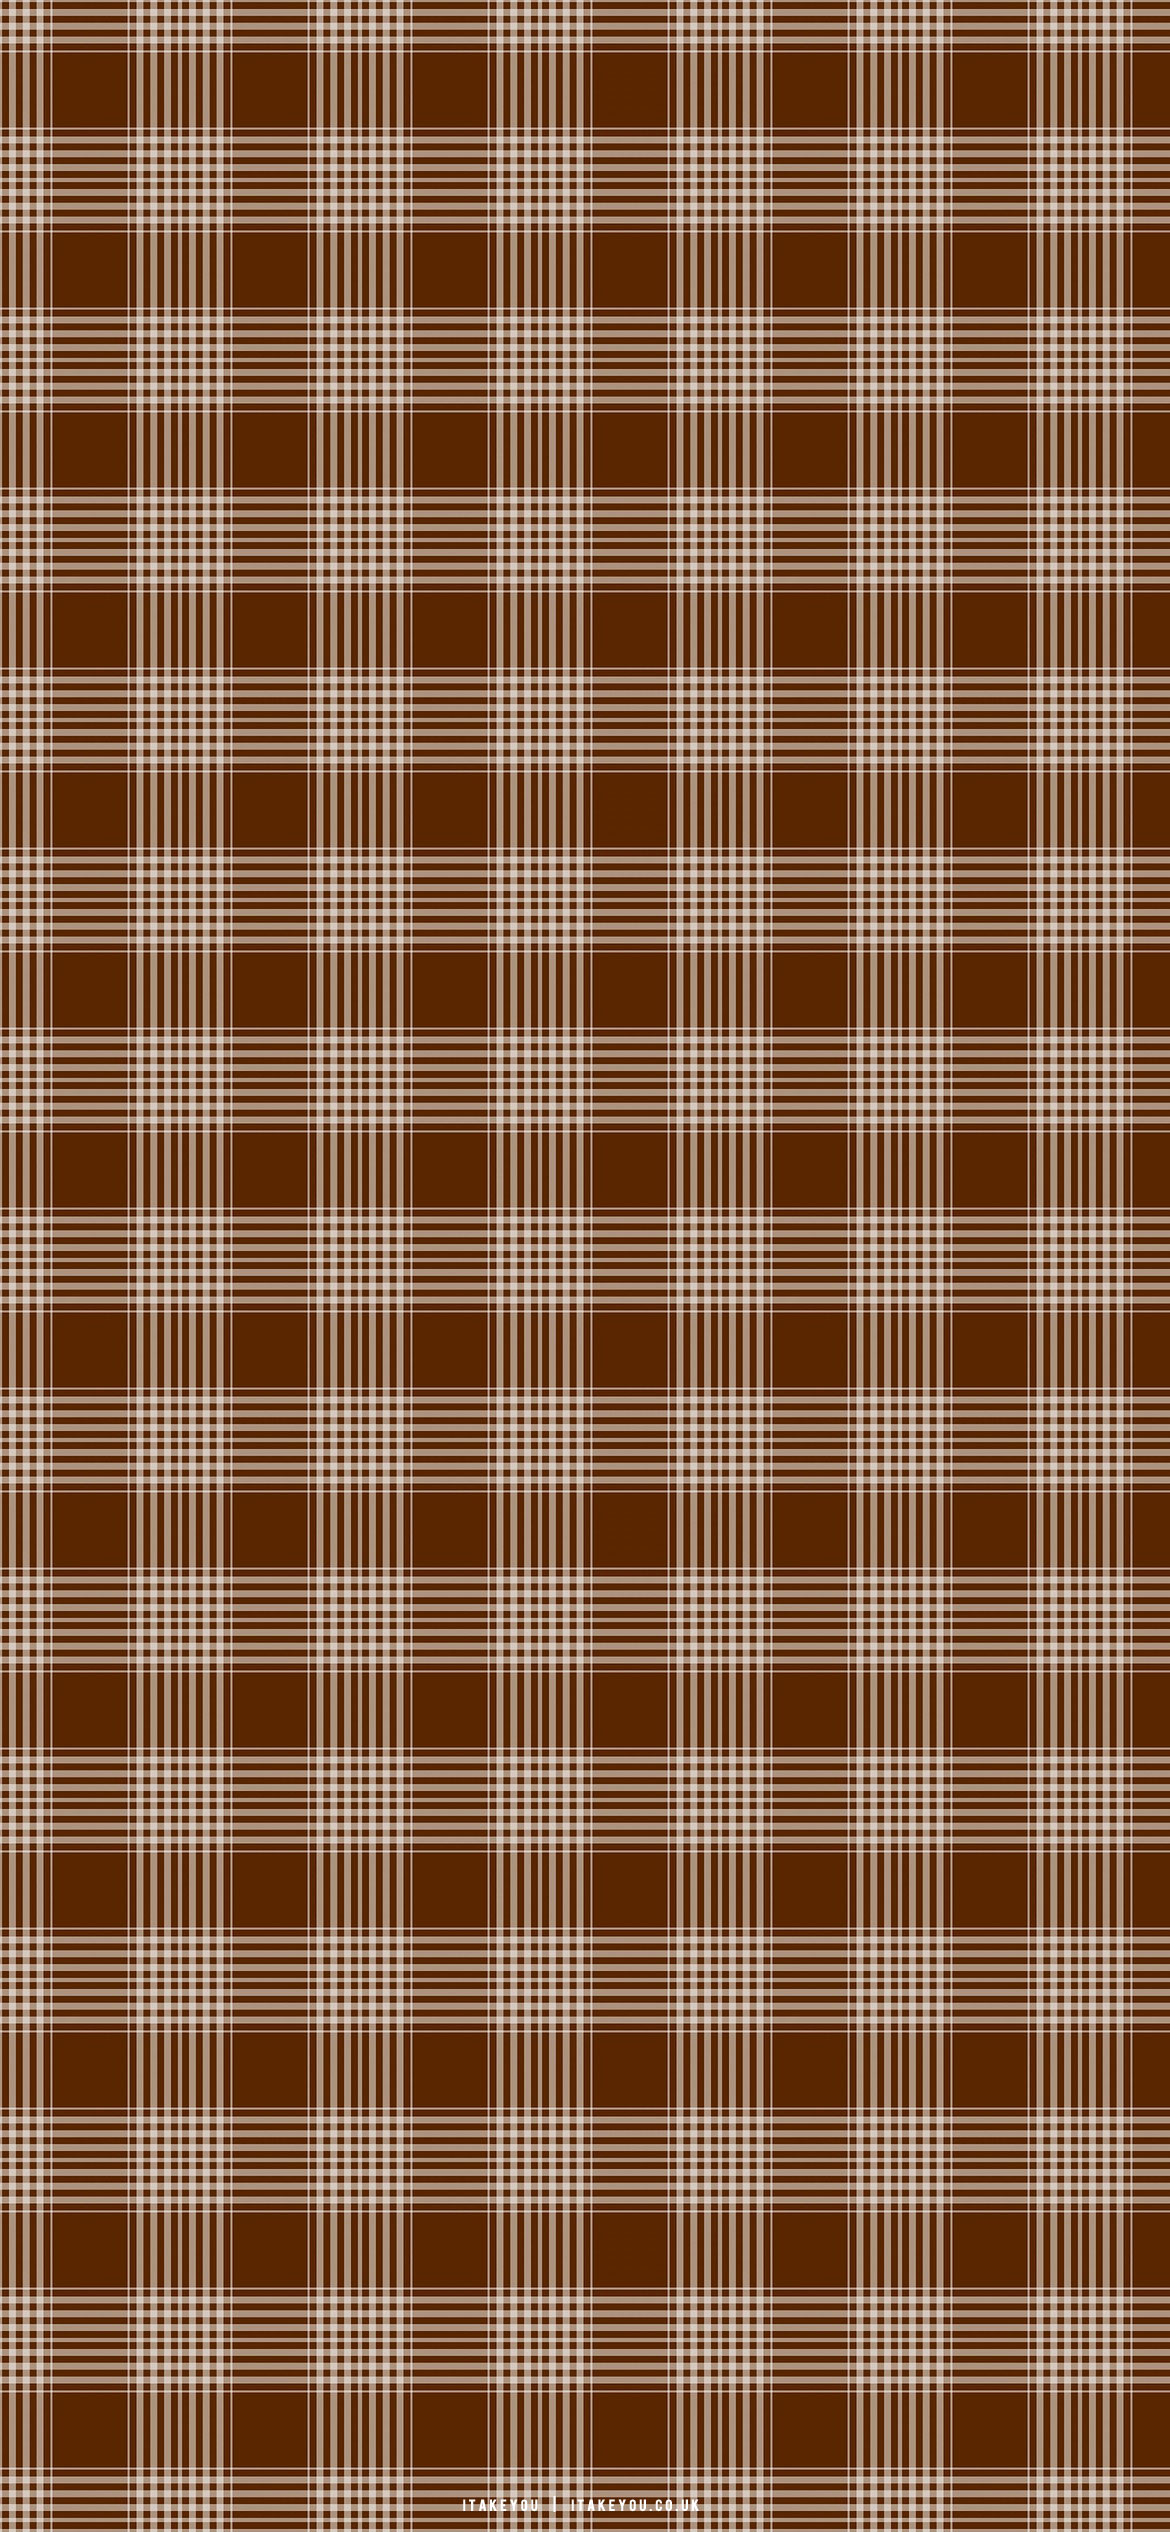 20 Minimalist Brown Wallpaper iPhone Ideas for iPhone : Brown Plaid